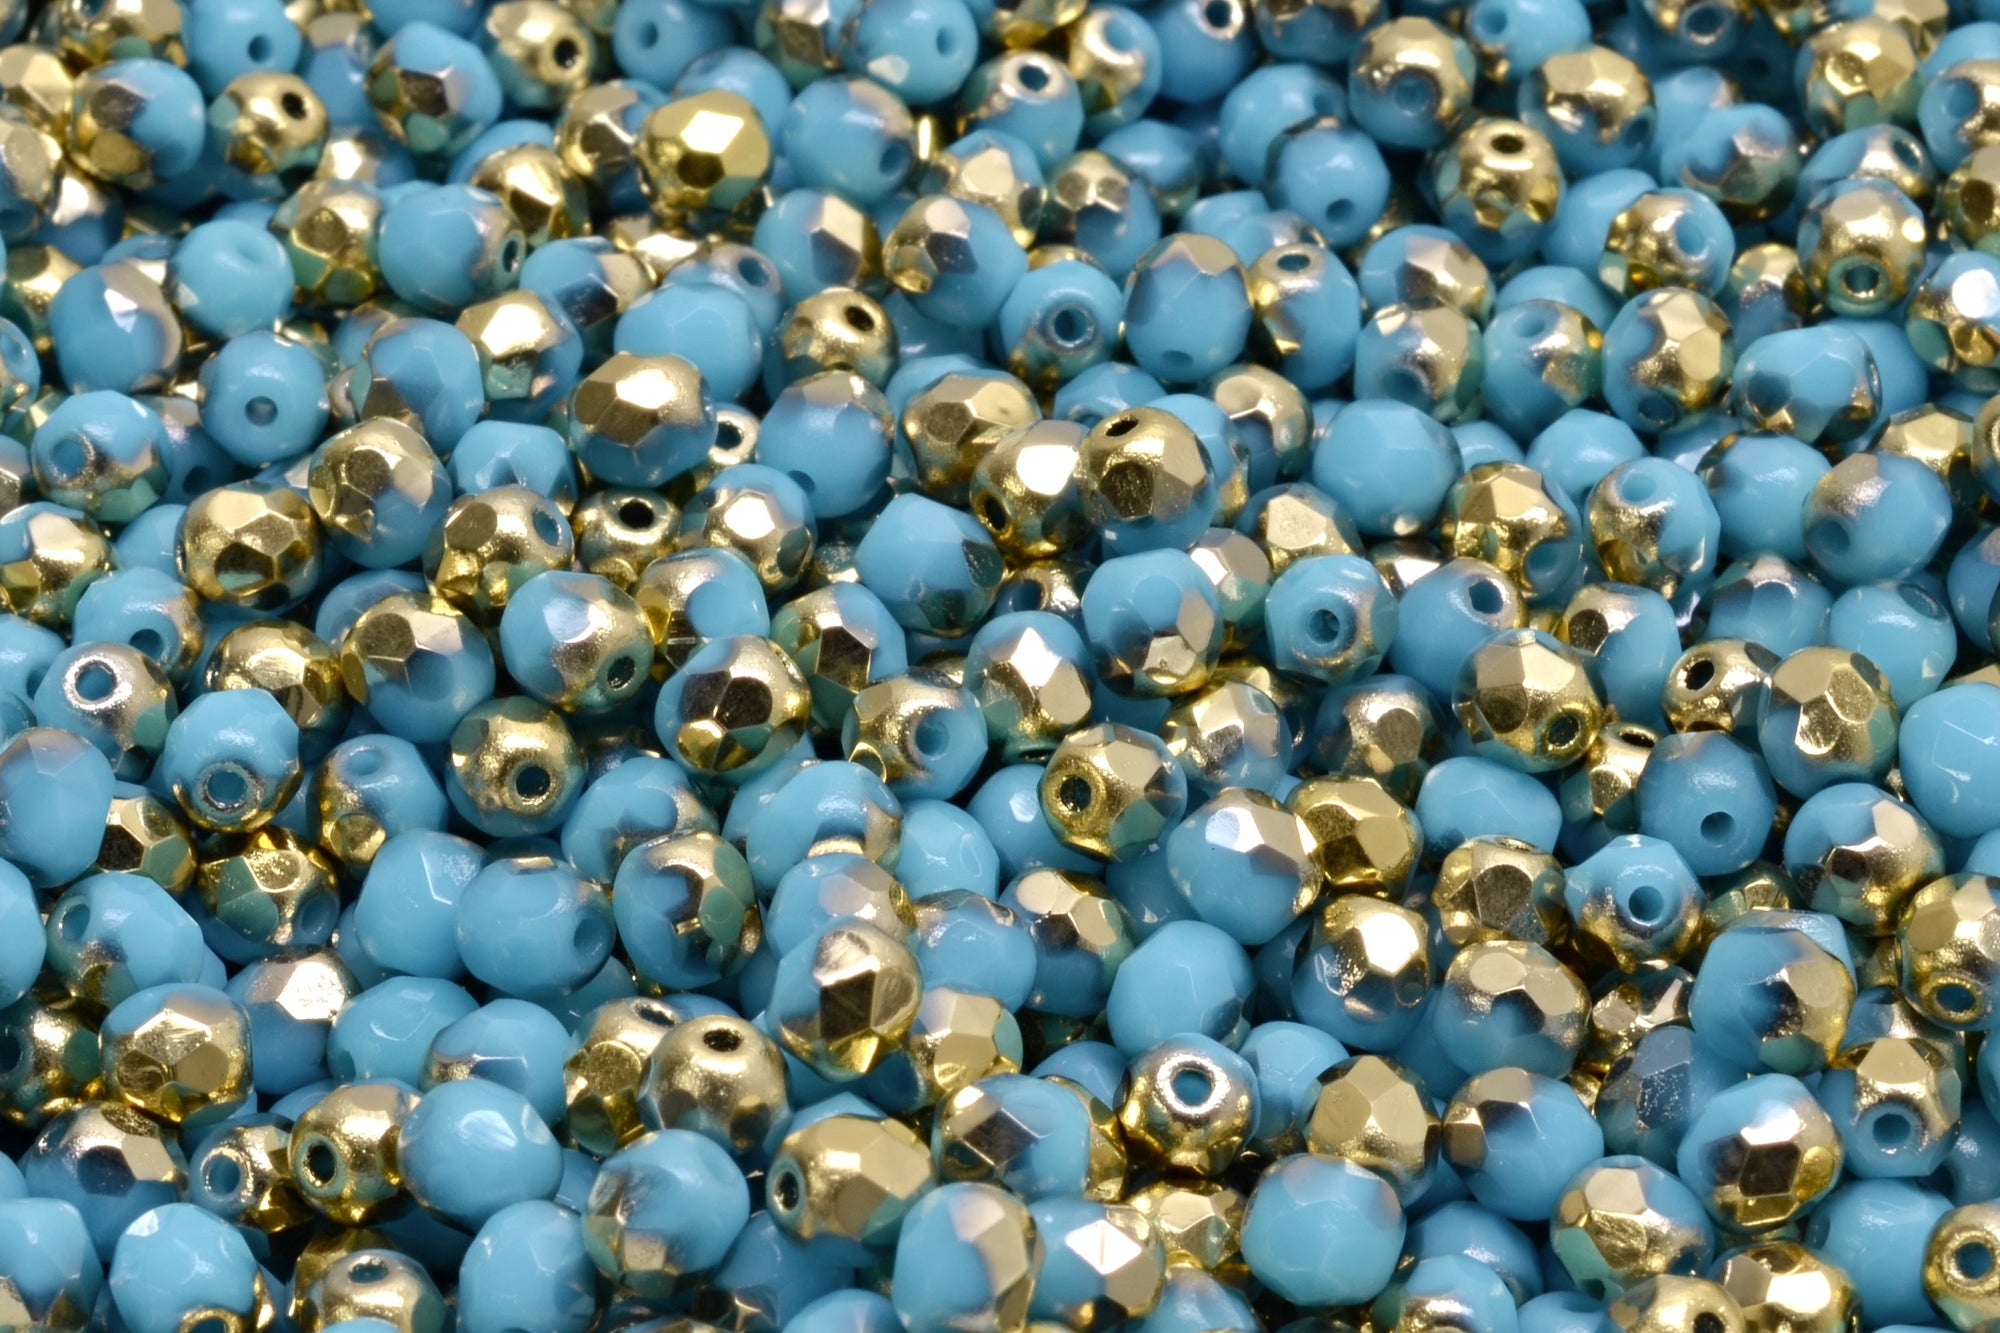 4mm Czech Fire Polish Beads, Turquoise Blue Amber, 50 pieces